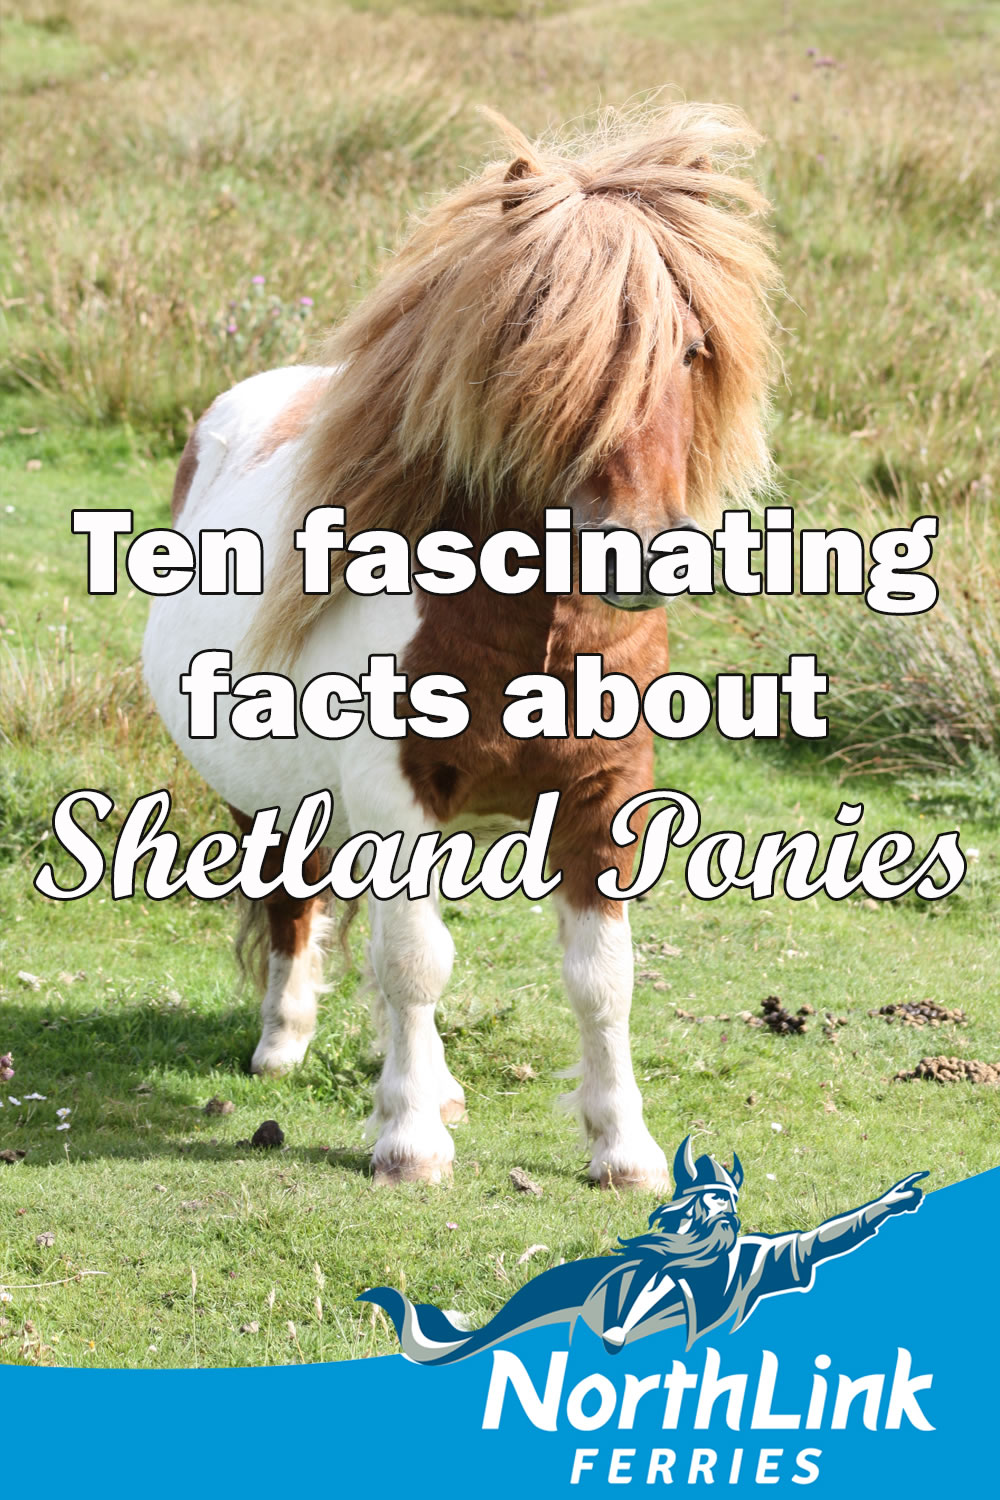 Ten fascinating facts about Shetland Ponies